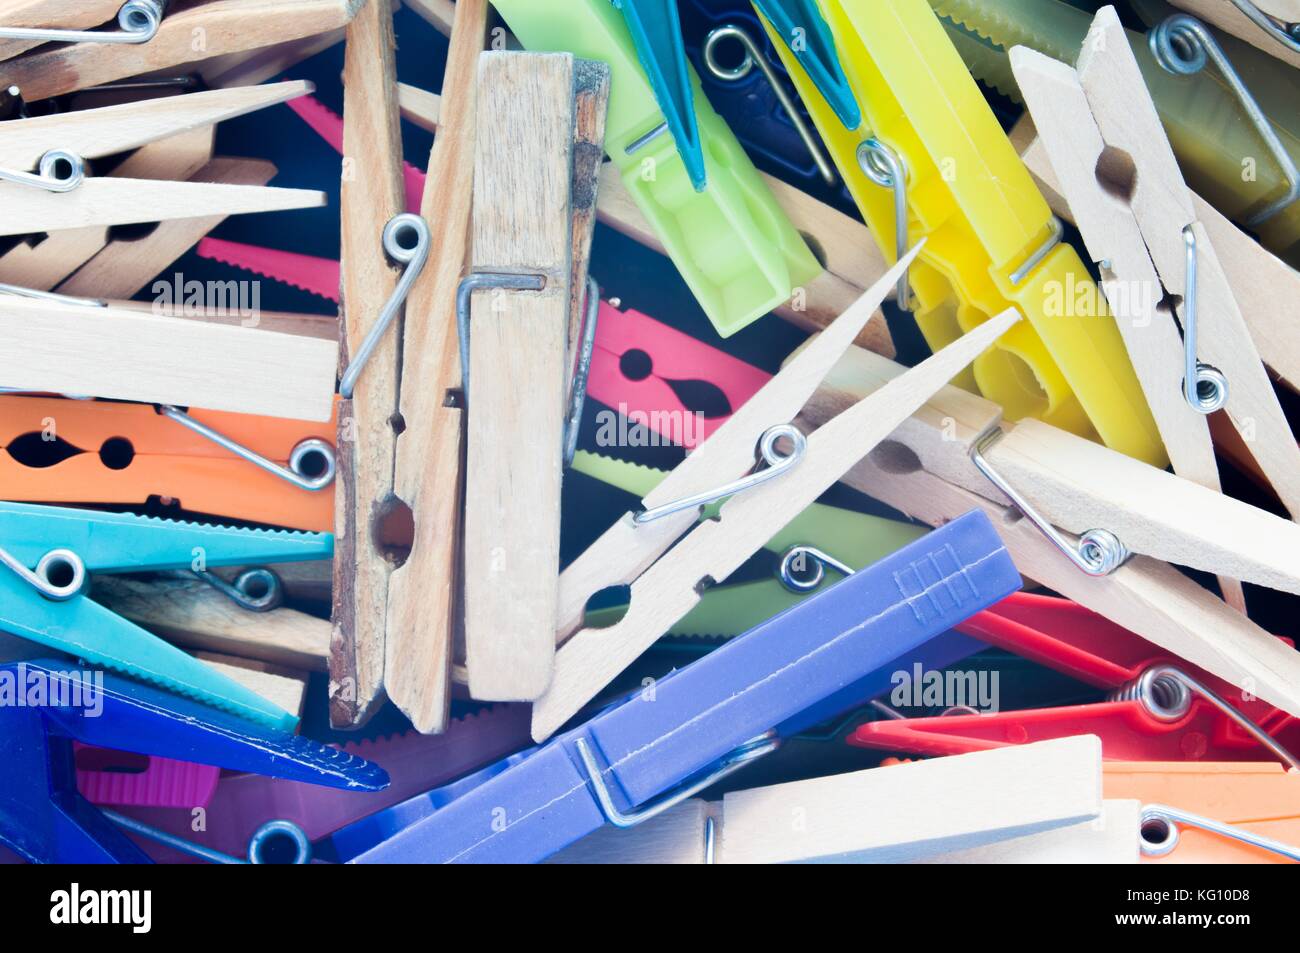 Composition with tweezers of different material and colors Stock Photo